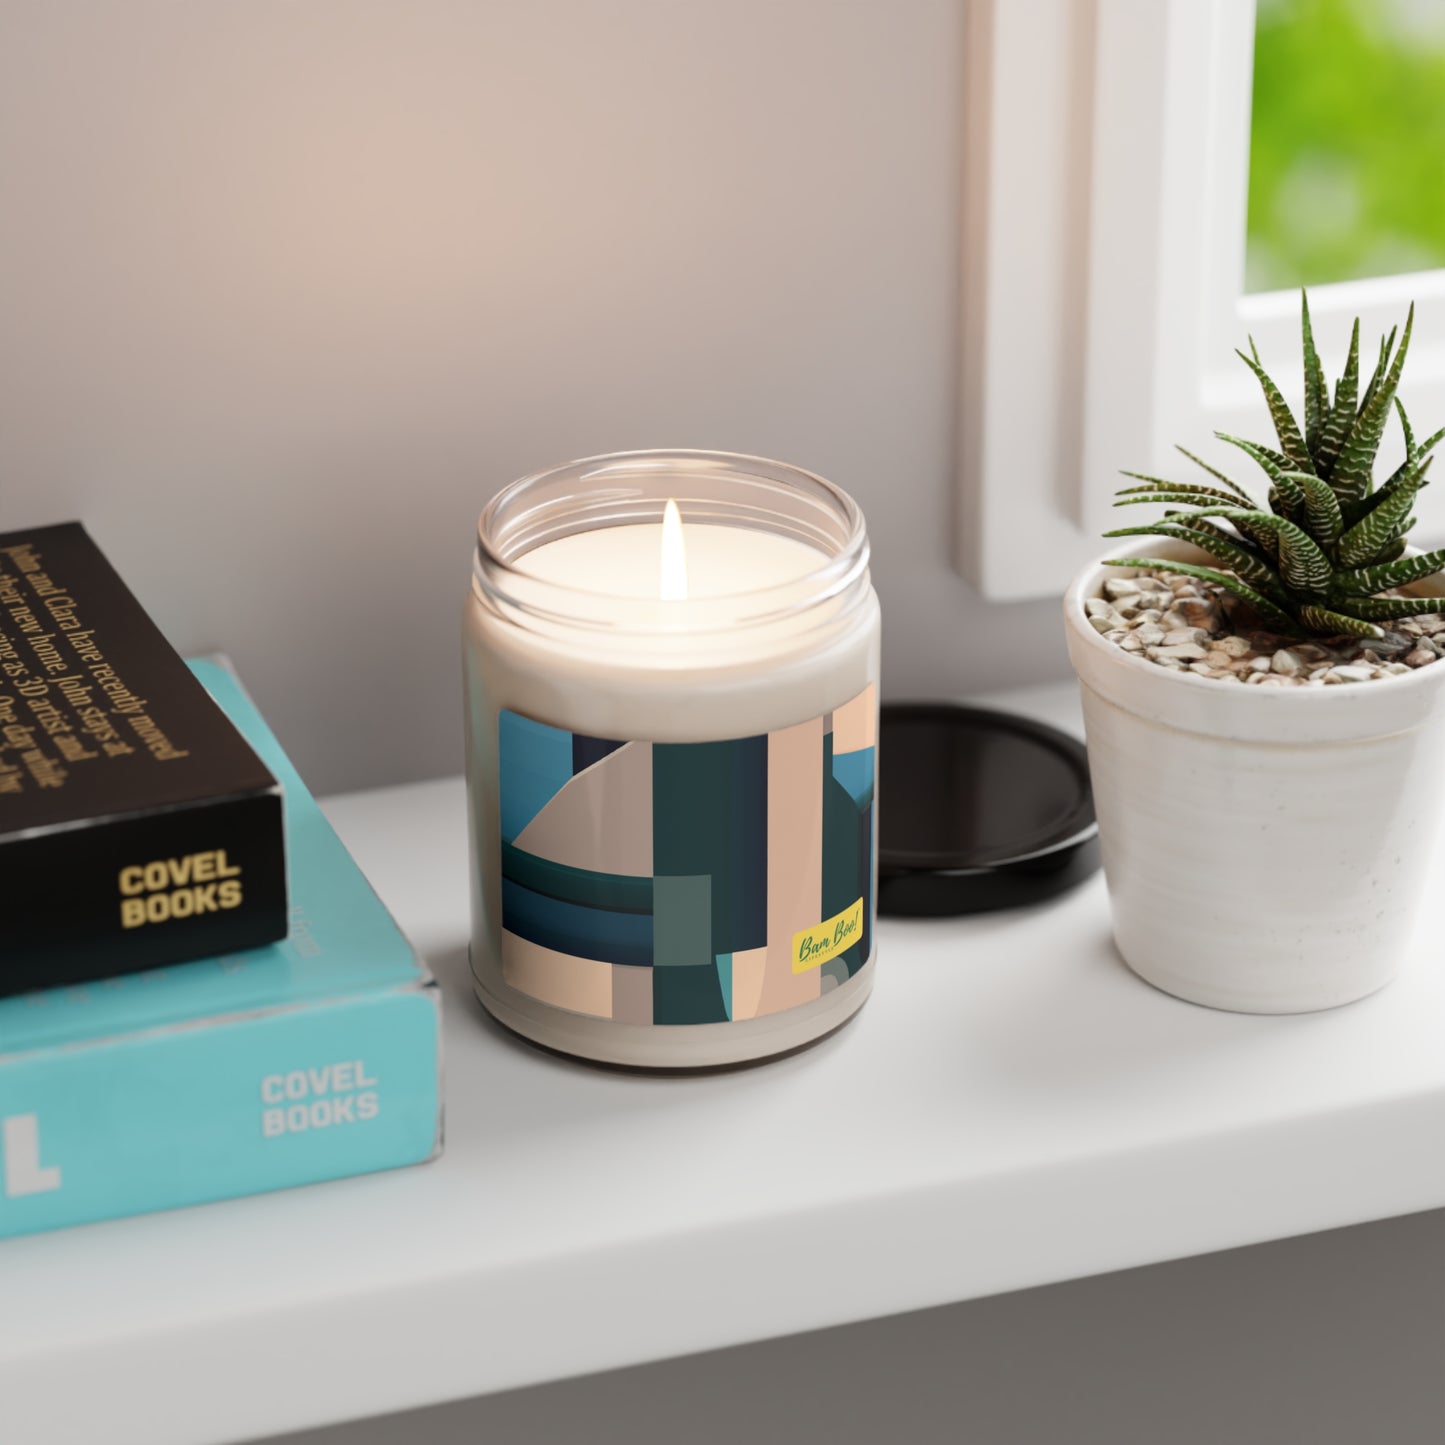 Synthesis of the Digital & Analog: An Exploration of Texture, Shape, Color, and Pattern. - Bam Boo! Lifestyle Eco-friendly Soy Candle